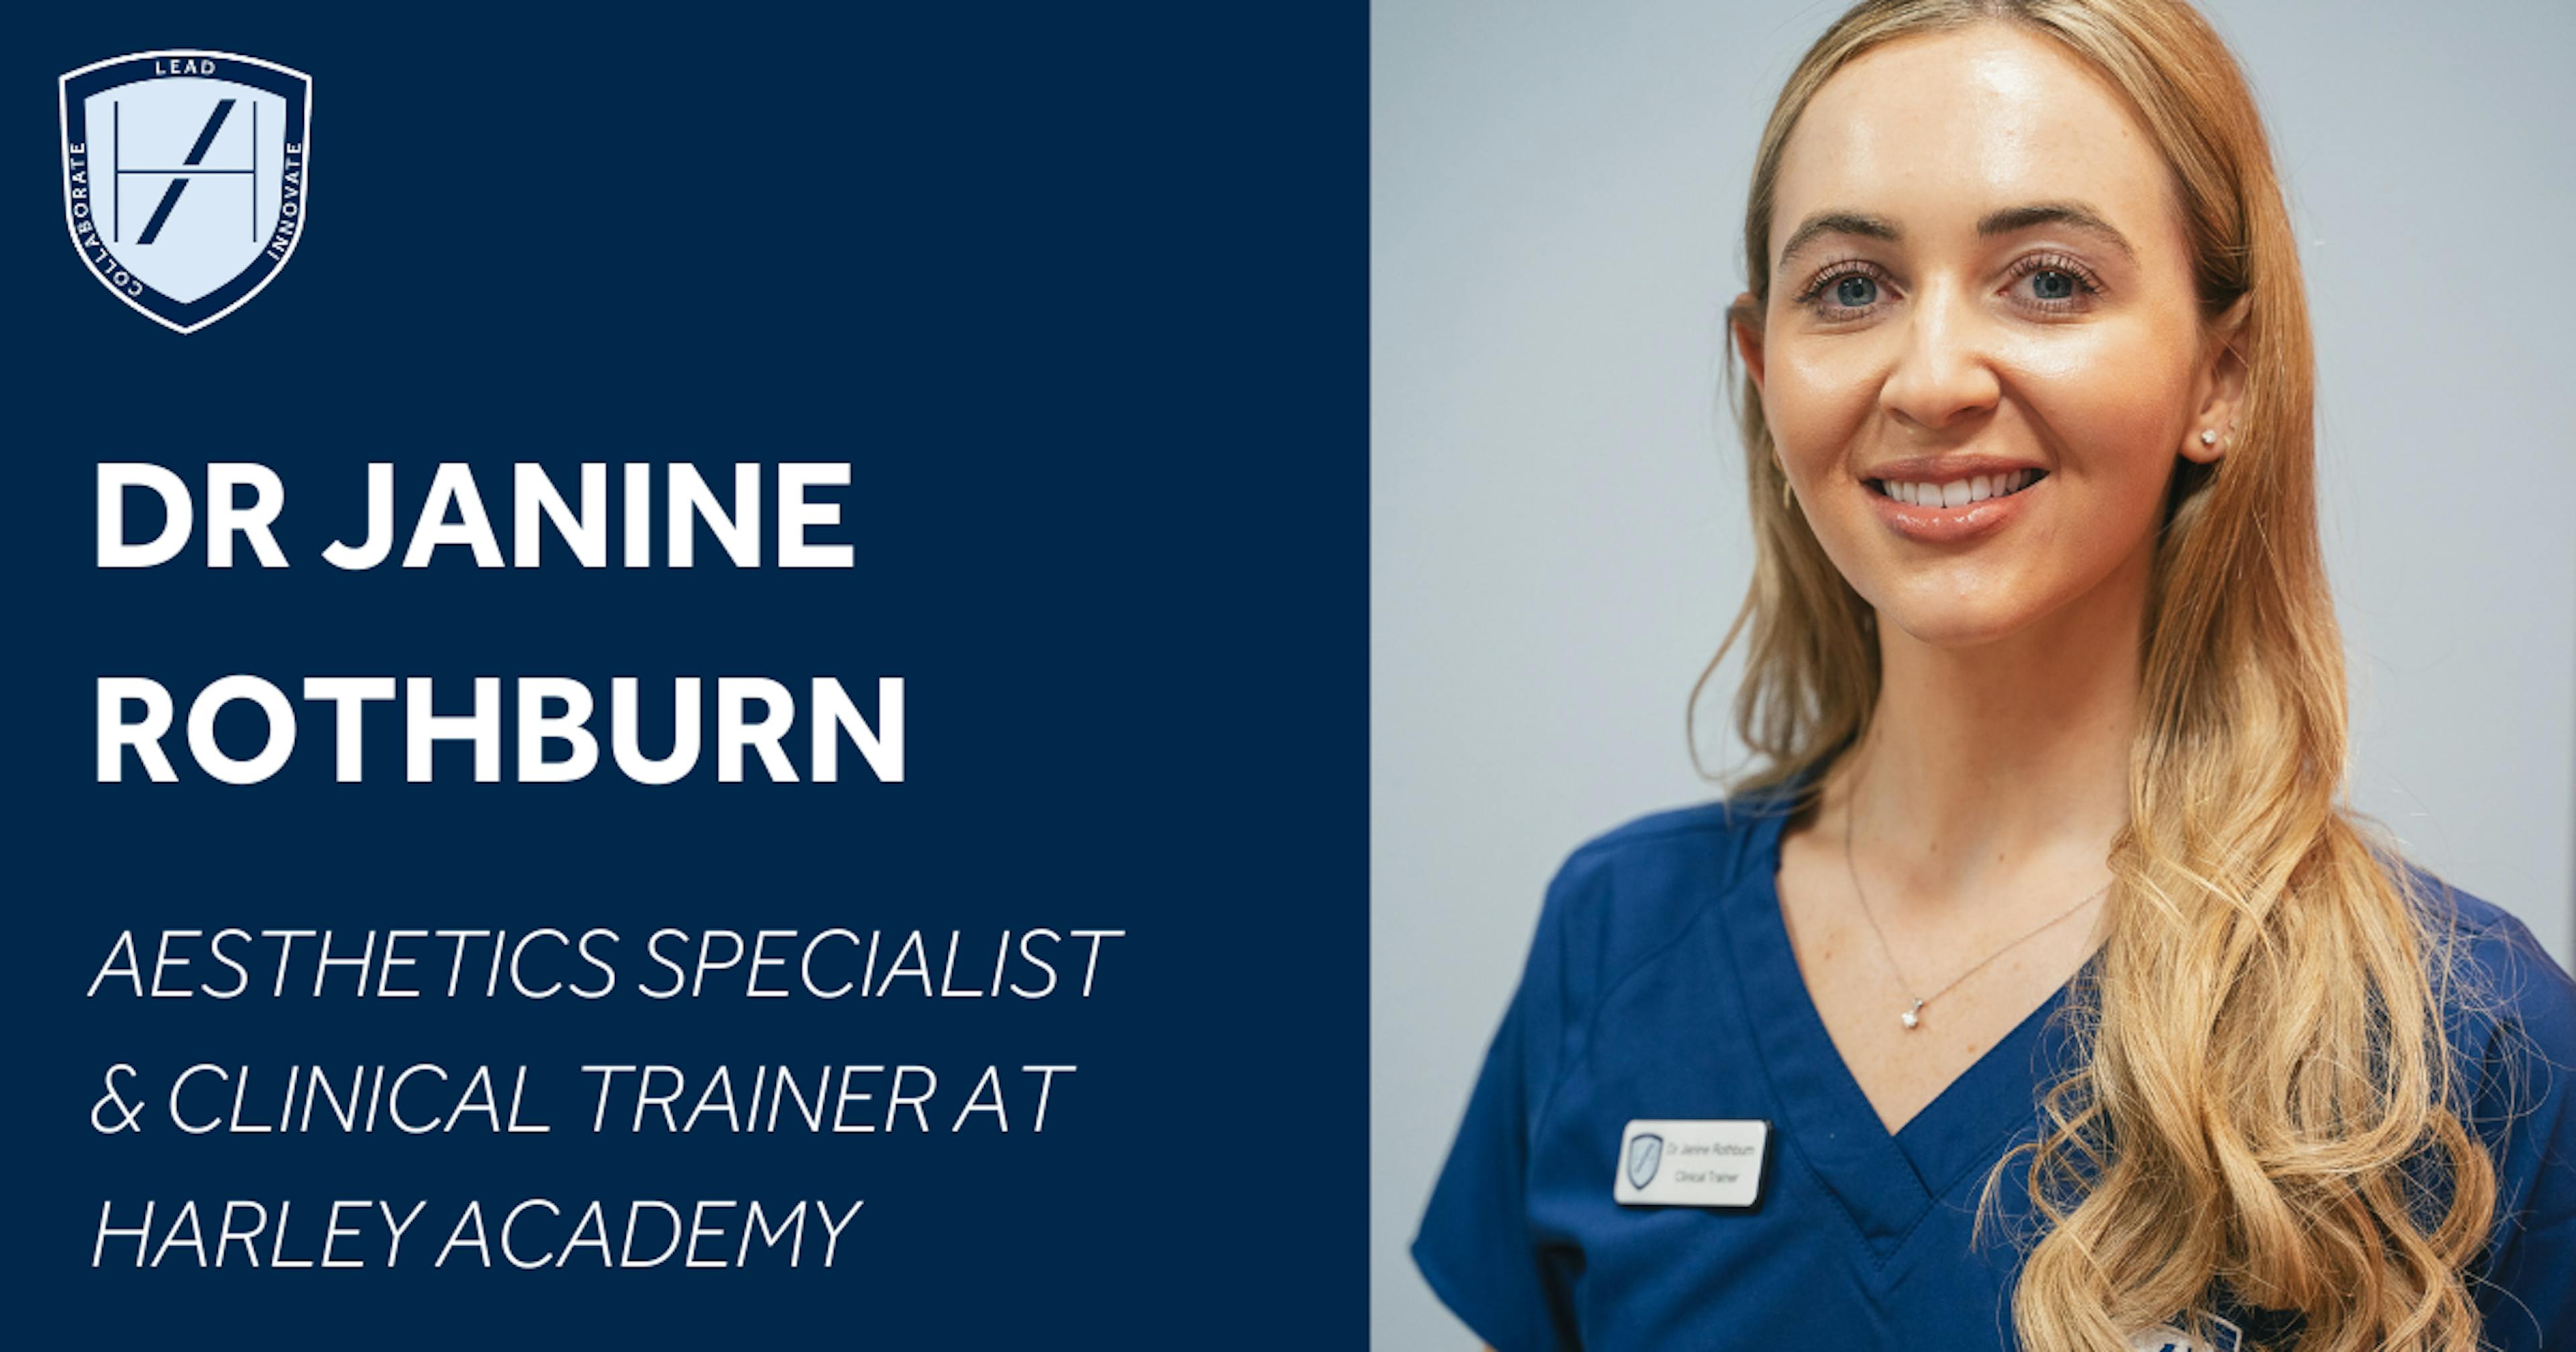 Dr Janine Rothburn - cosmetic doctor and clinical trainer mentor at Harley Academy London